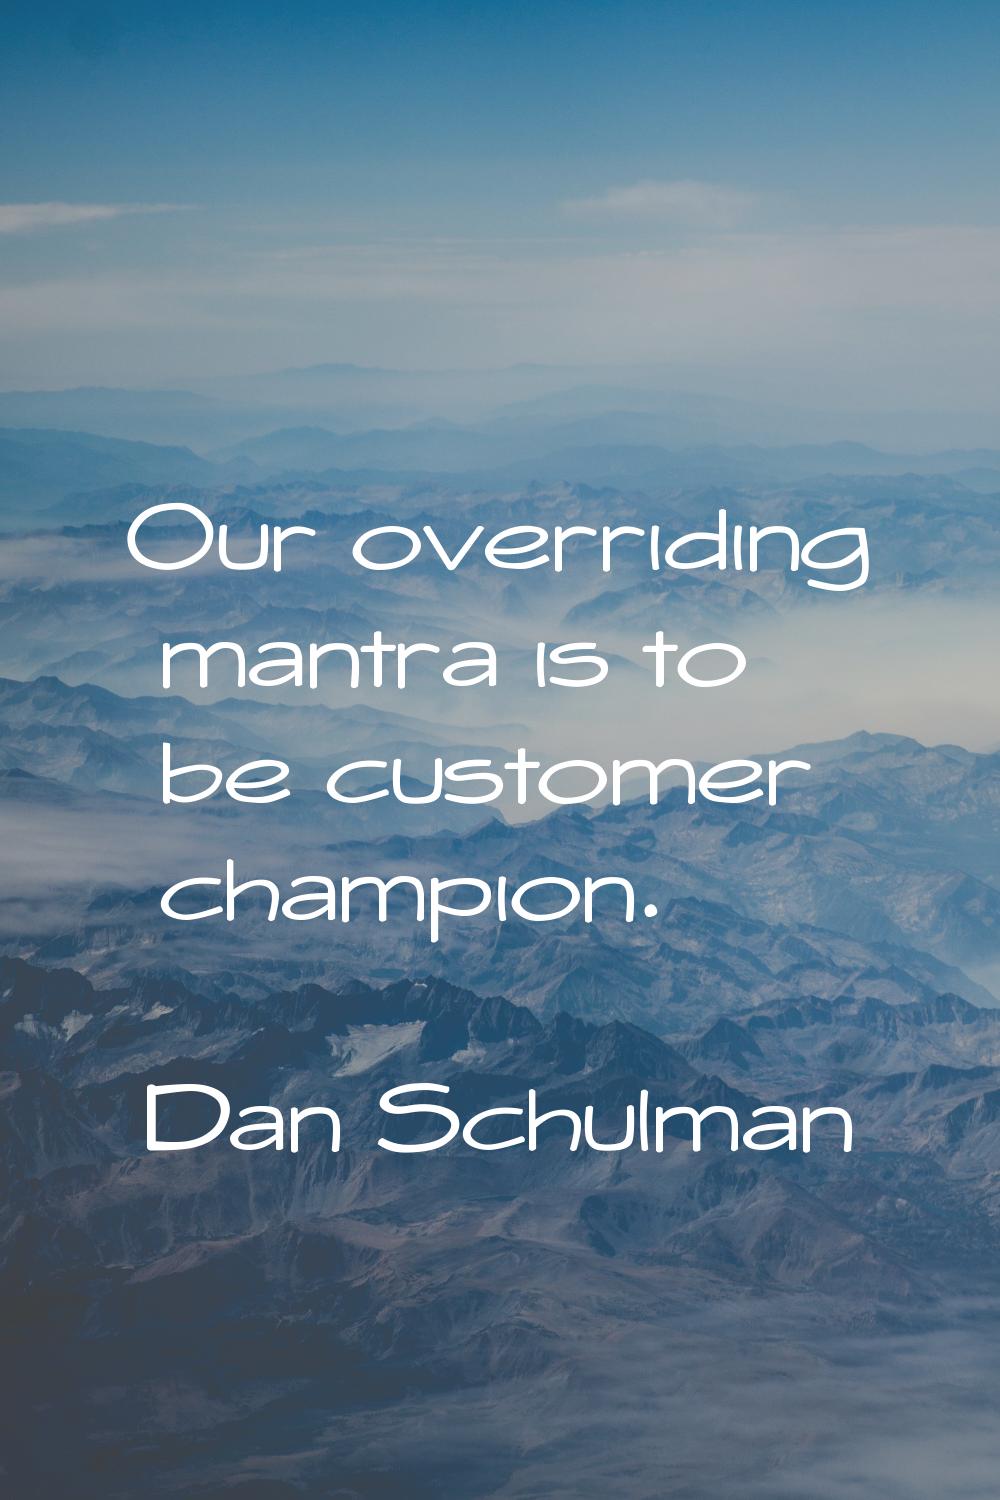 Our overriding mantra is to be customer champion.